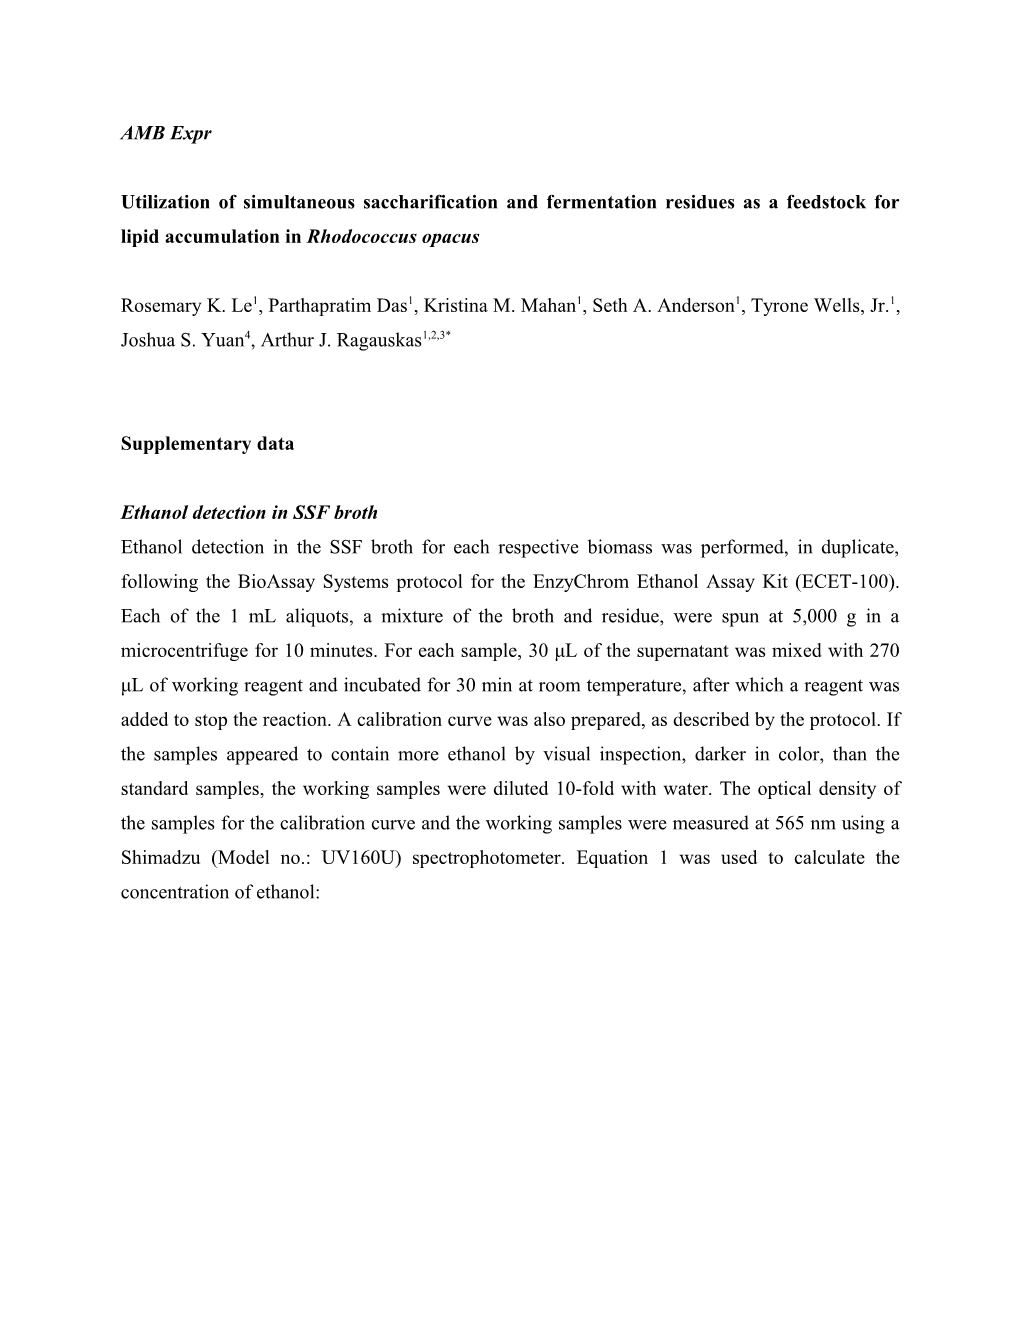 Utilization of Simultaneous Saccharification and Fermentation Residues As a Feedstock